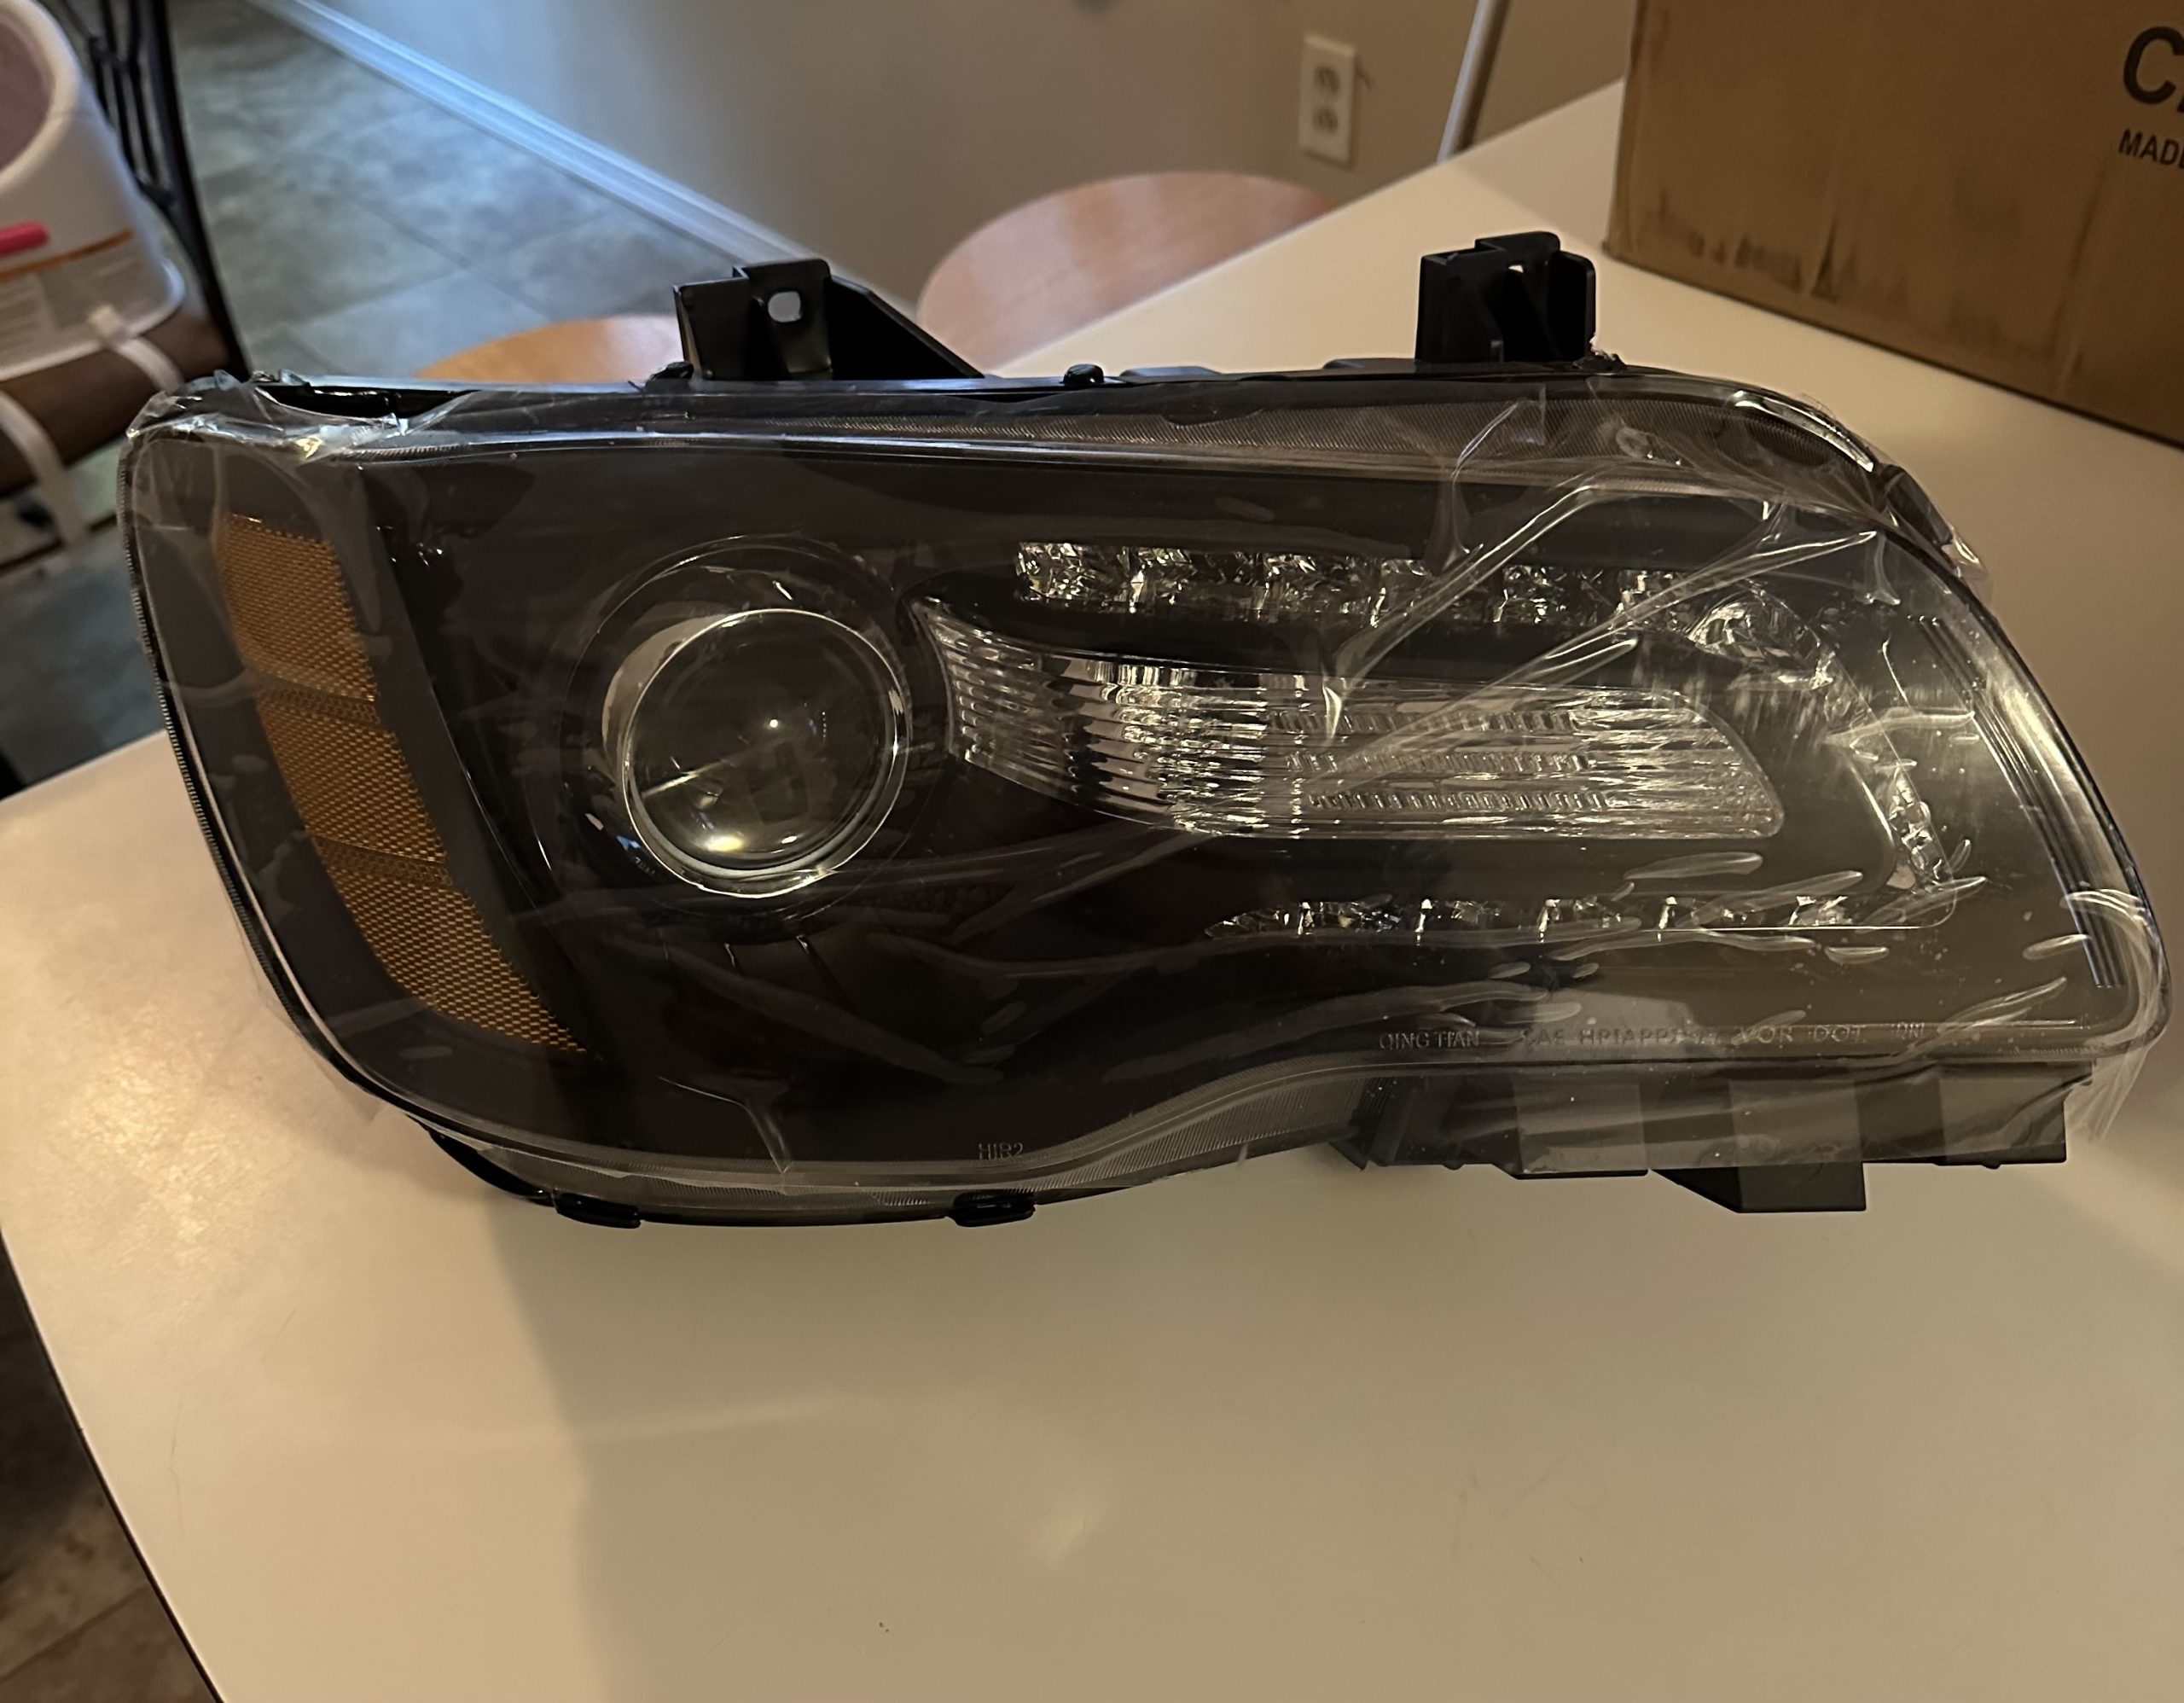 New replacement headlights for Chrysler 300